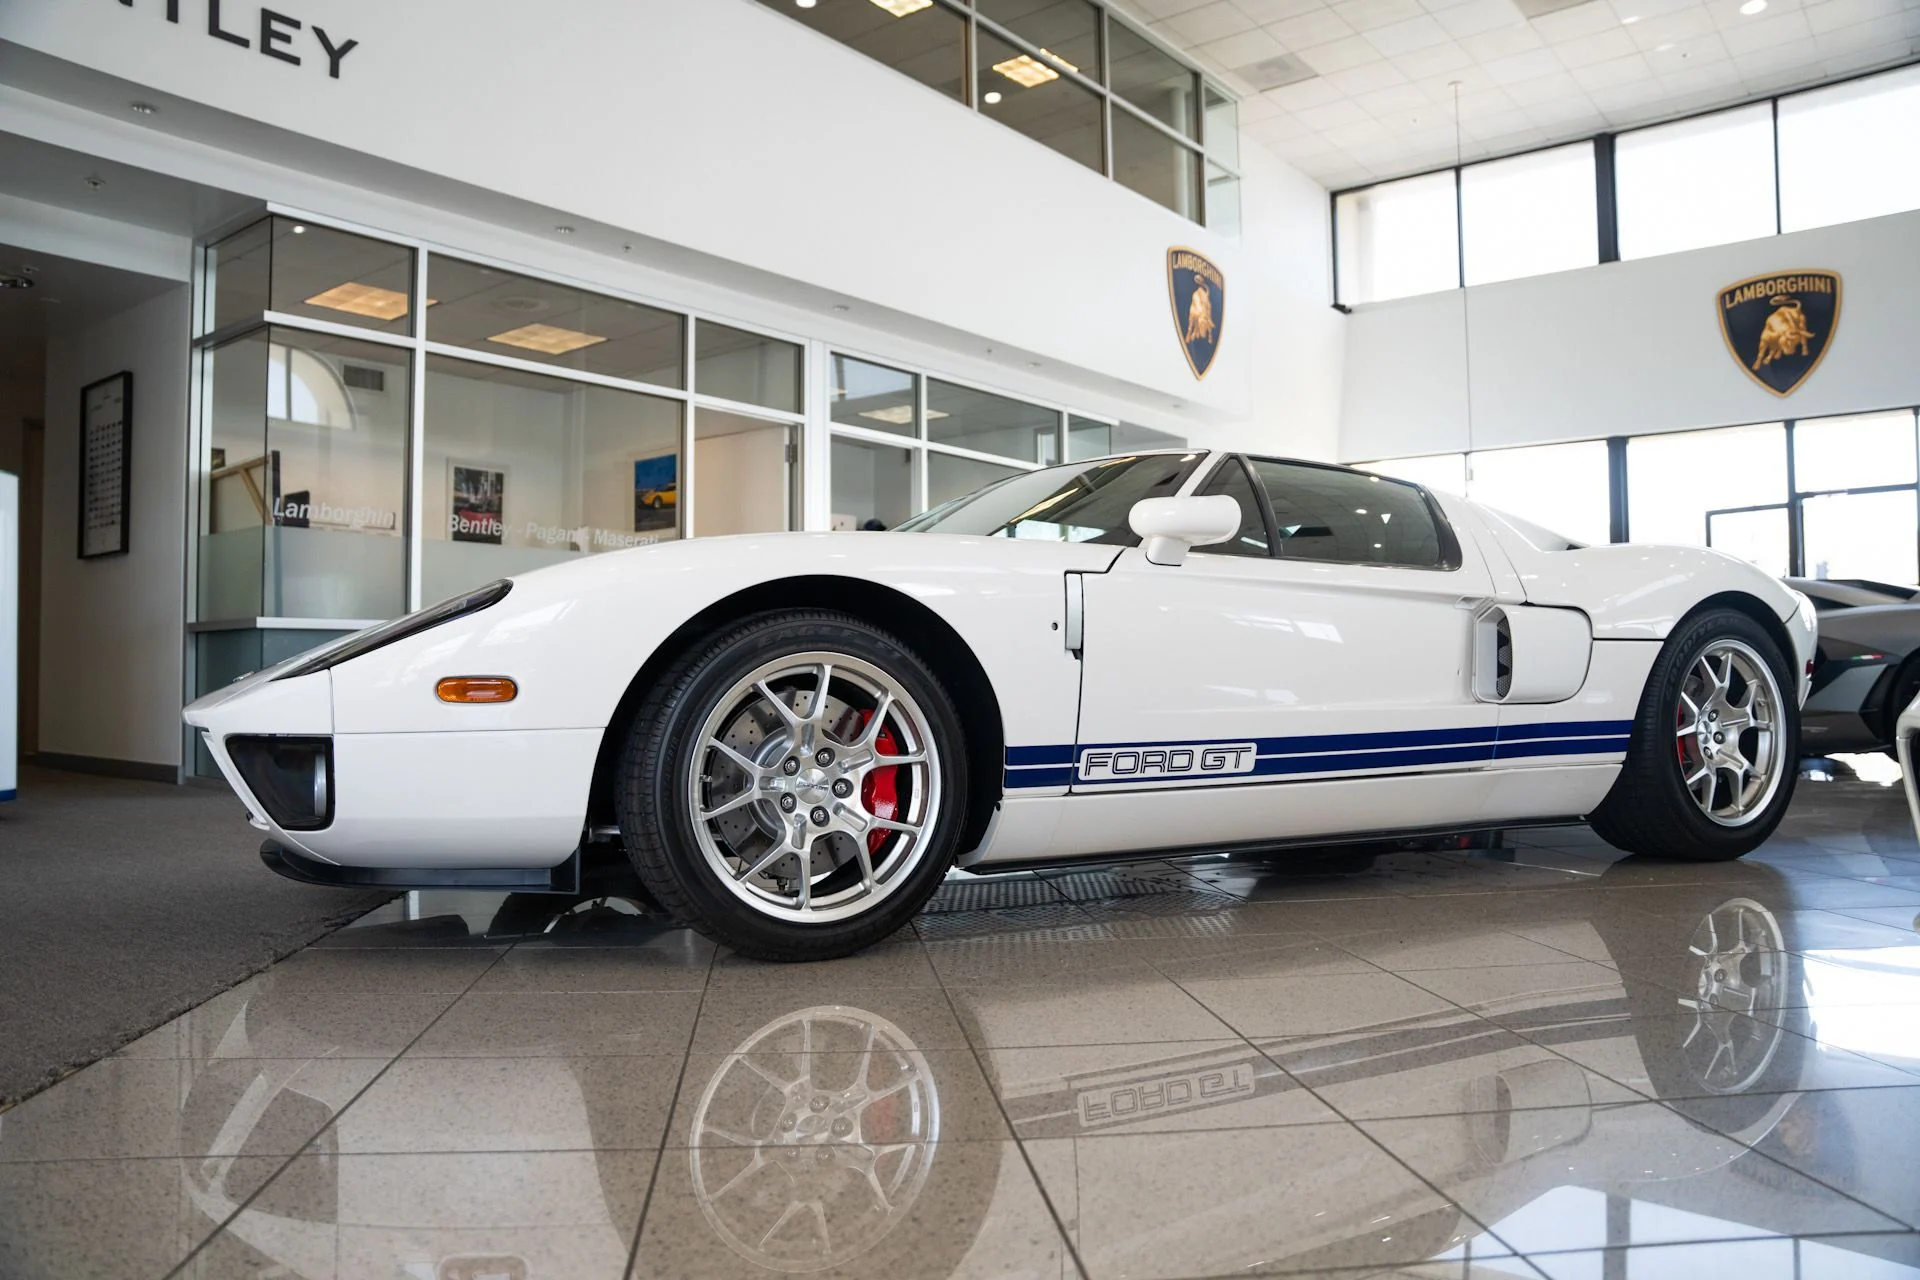 Used 2006 Ford GT coupe (56)